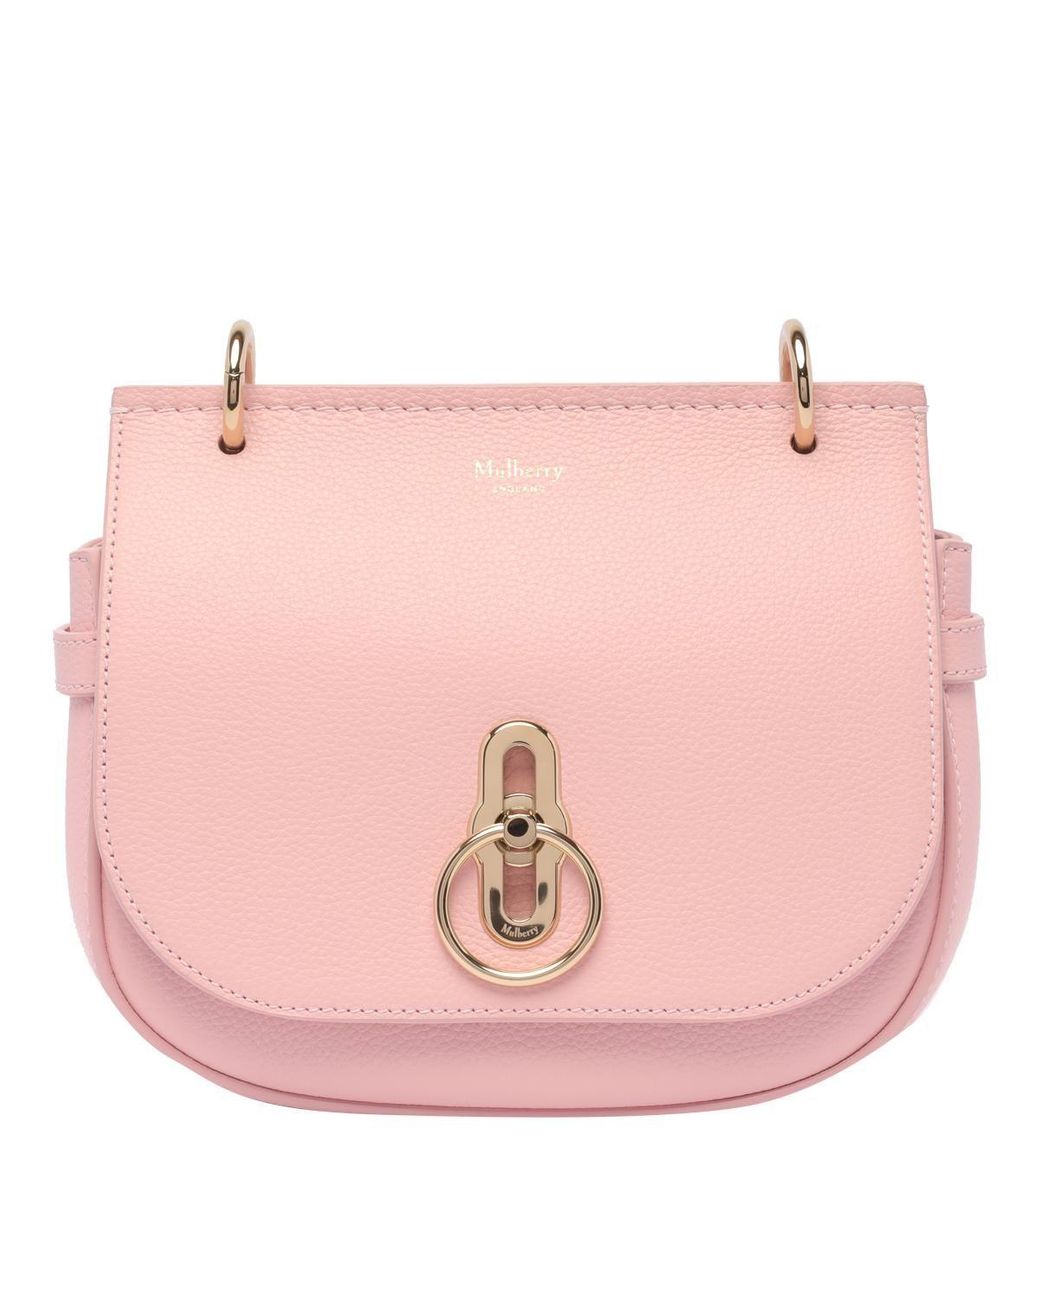 Mulberry Inspired cross over body bag - Pink - The Style Market